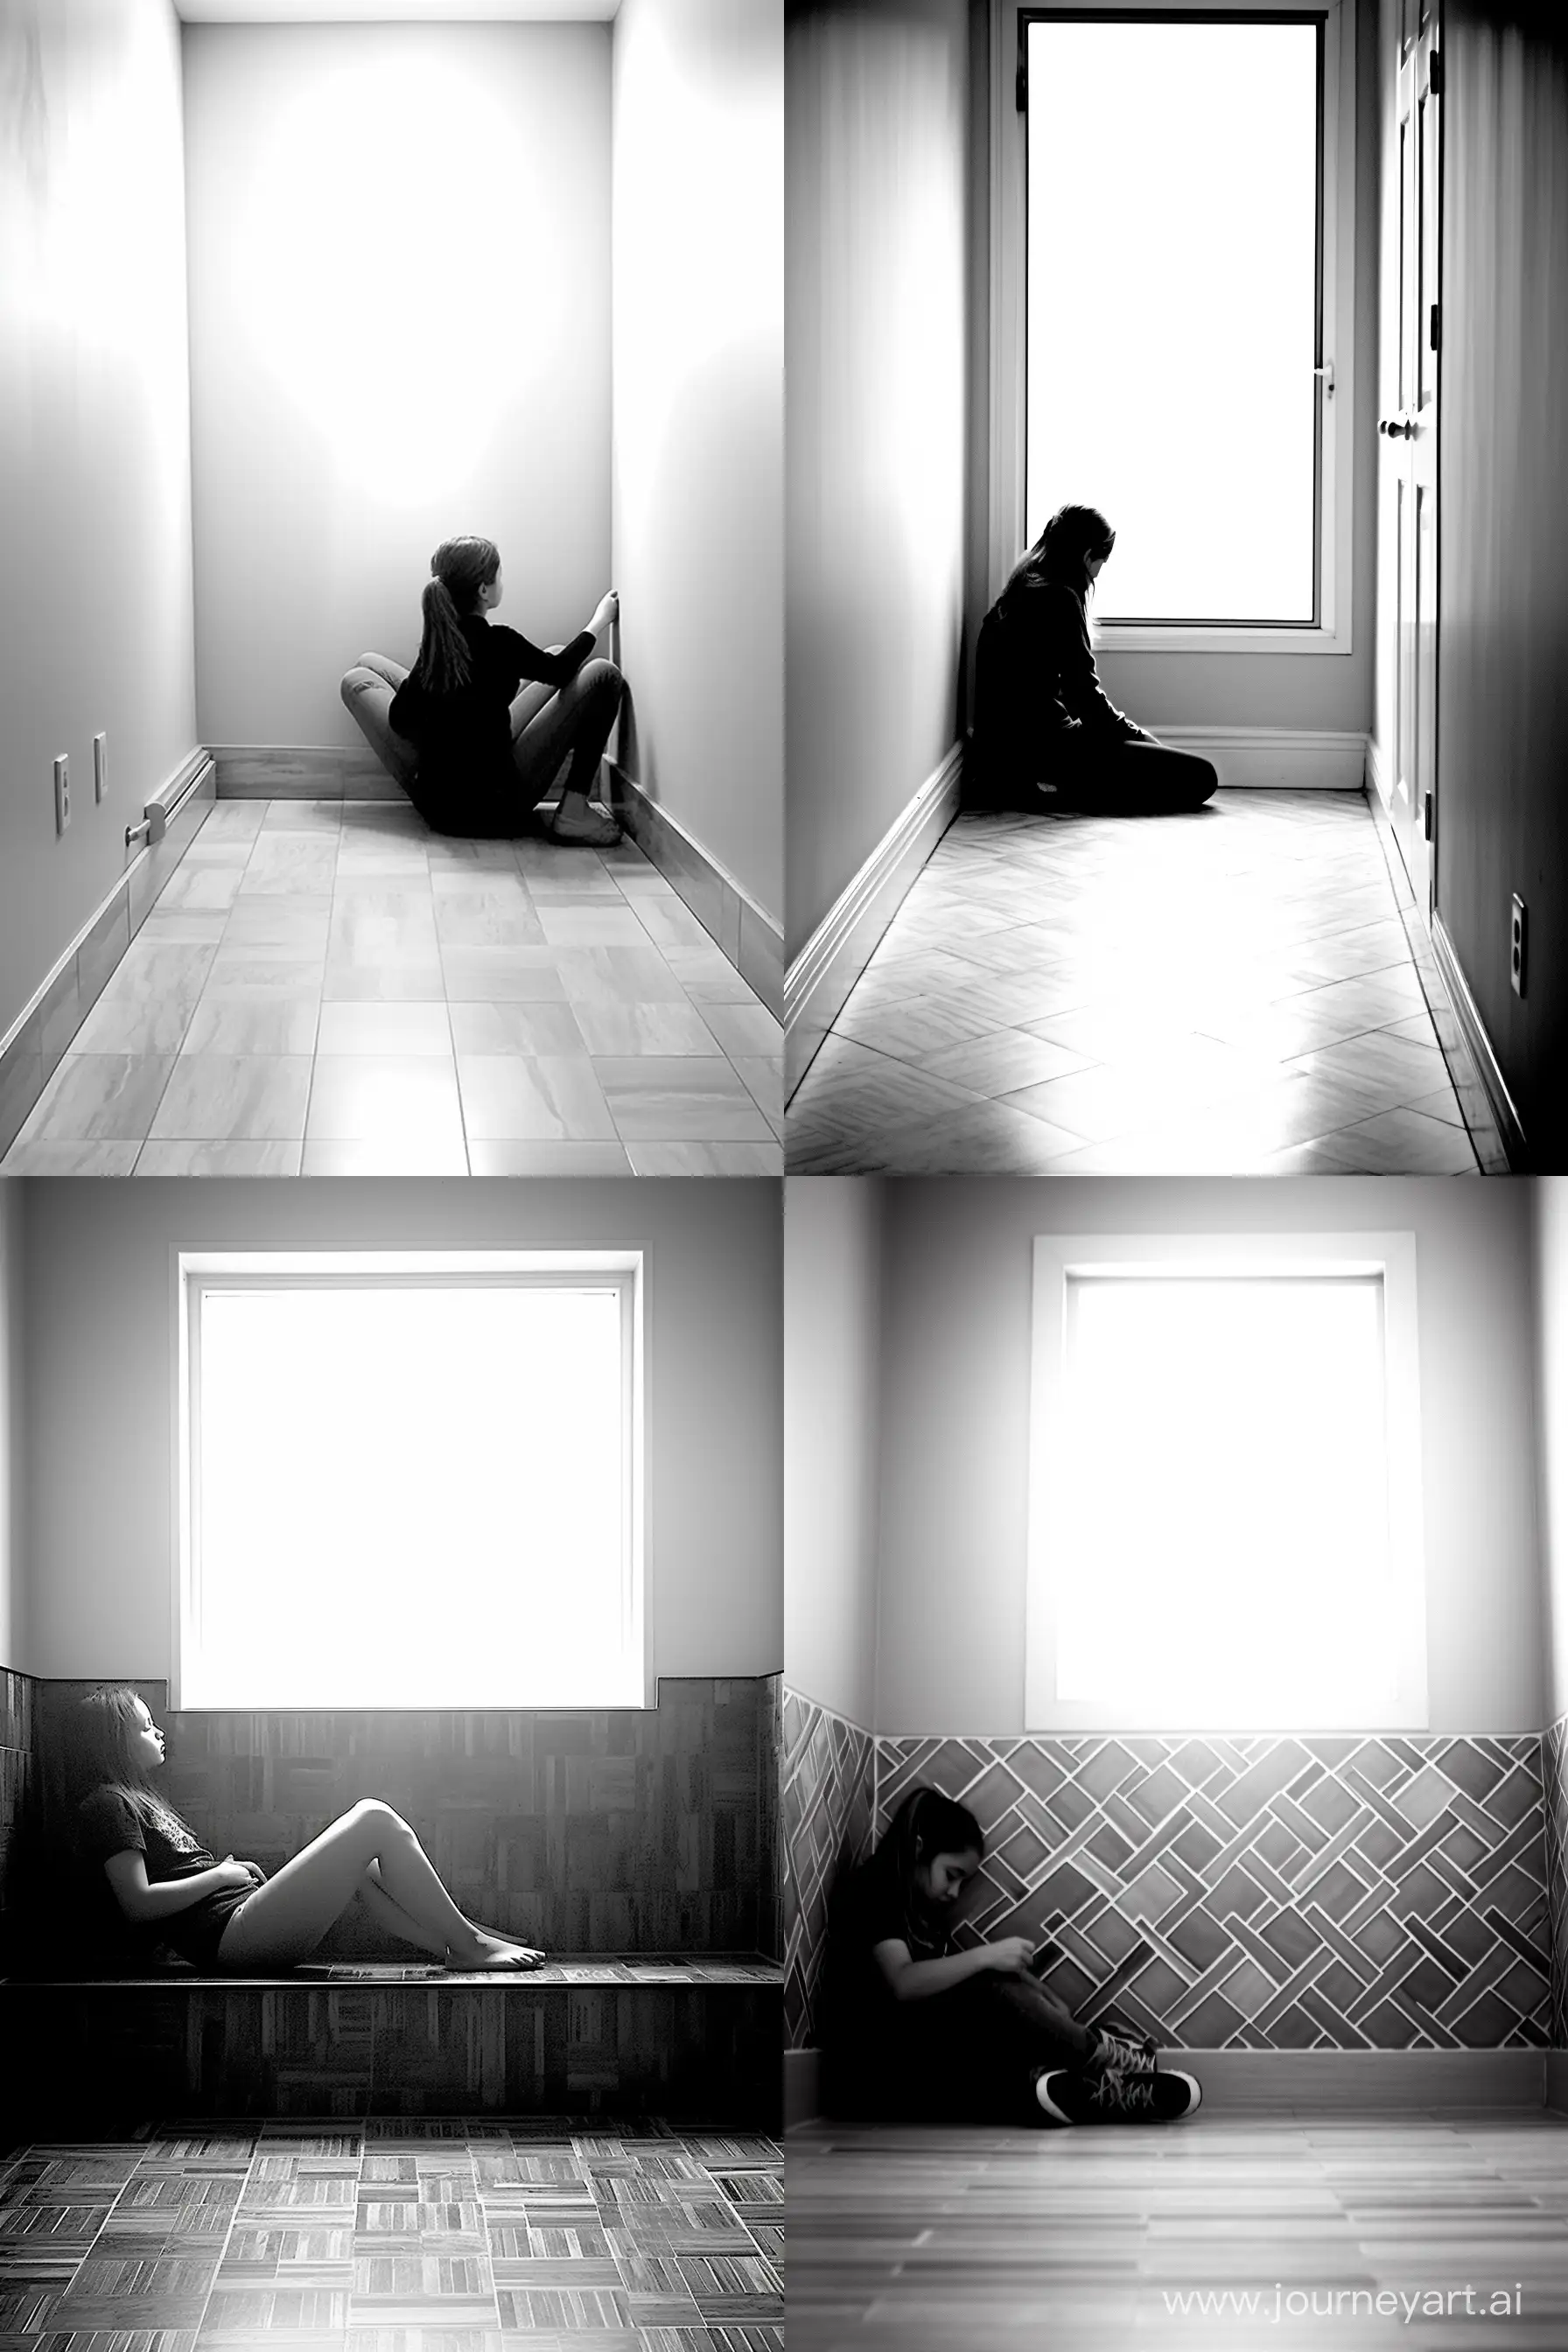 black-and-white photograph depicting a scene with a young adult female sitting on the floor of a bathroom. She is unhinged and losing her mind. Shes wearing a long sleeve sweater top and sleep shorts. The natural light from a window above the toilet creates soft shadows, emphasizing the textures of the bathroom tiles, floor patterns, and fixtures. The viewer's perspective is from the doorway, looking down at the disturbing scene. The monochromatic photograph uses tonal contrasts, focusing on the young woman's deranged activity in a mundane environment. --ar 2:3